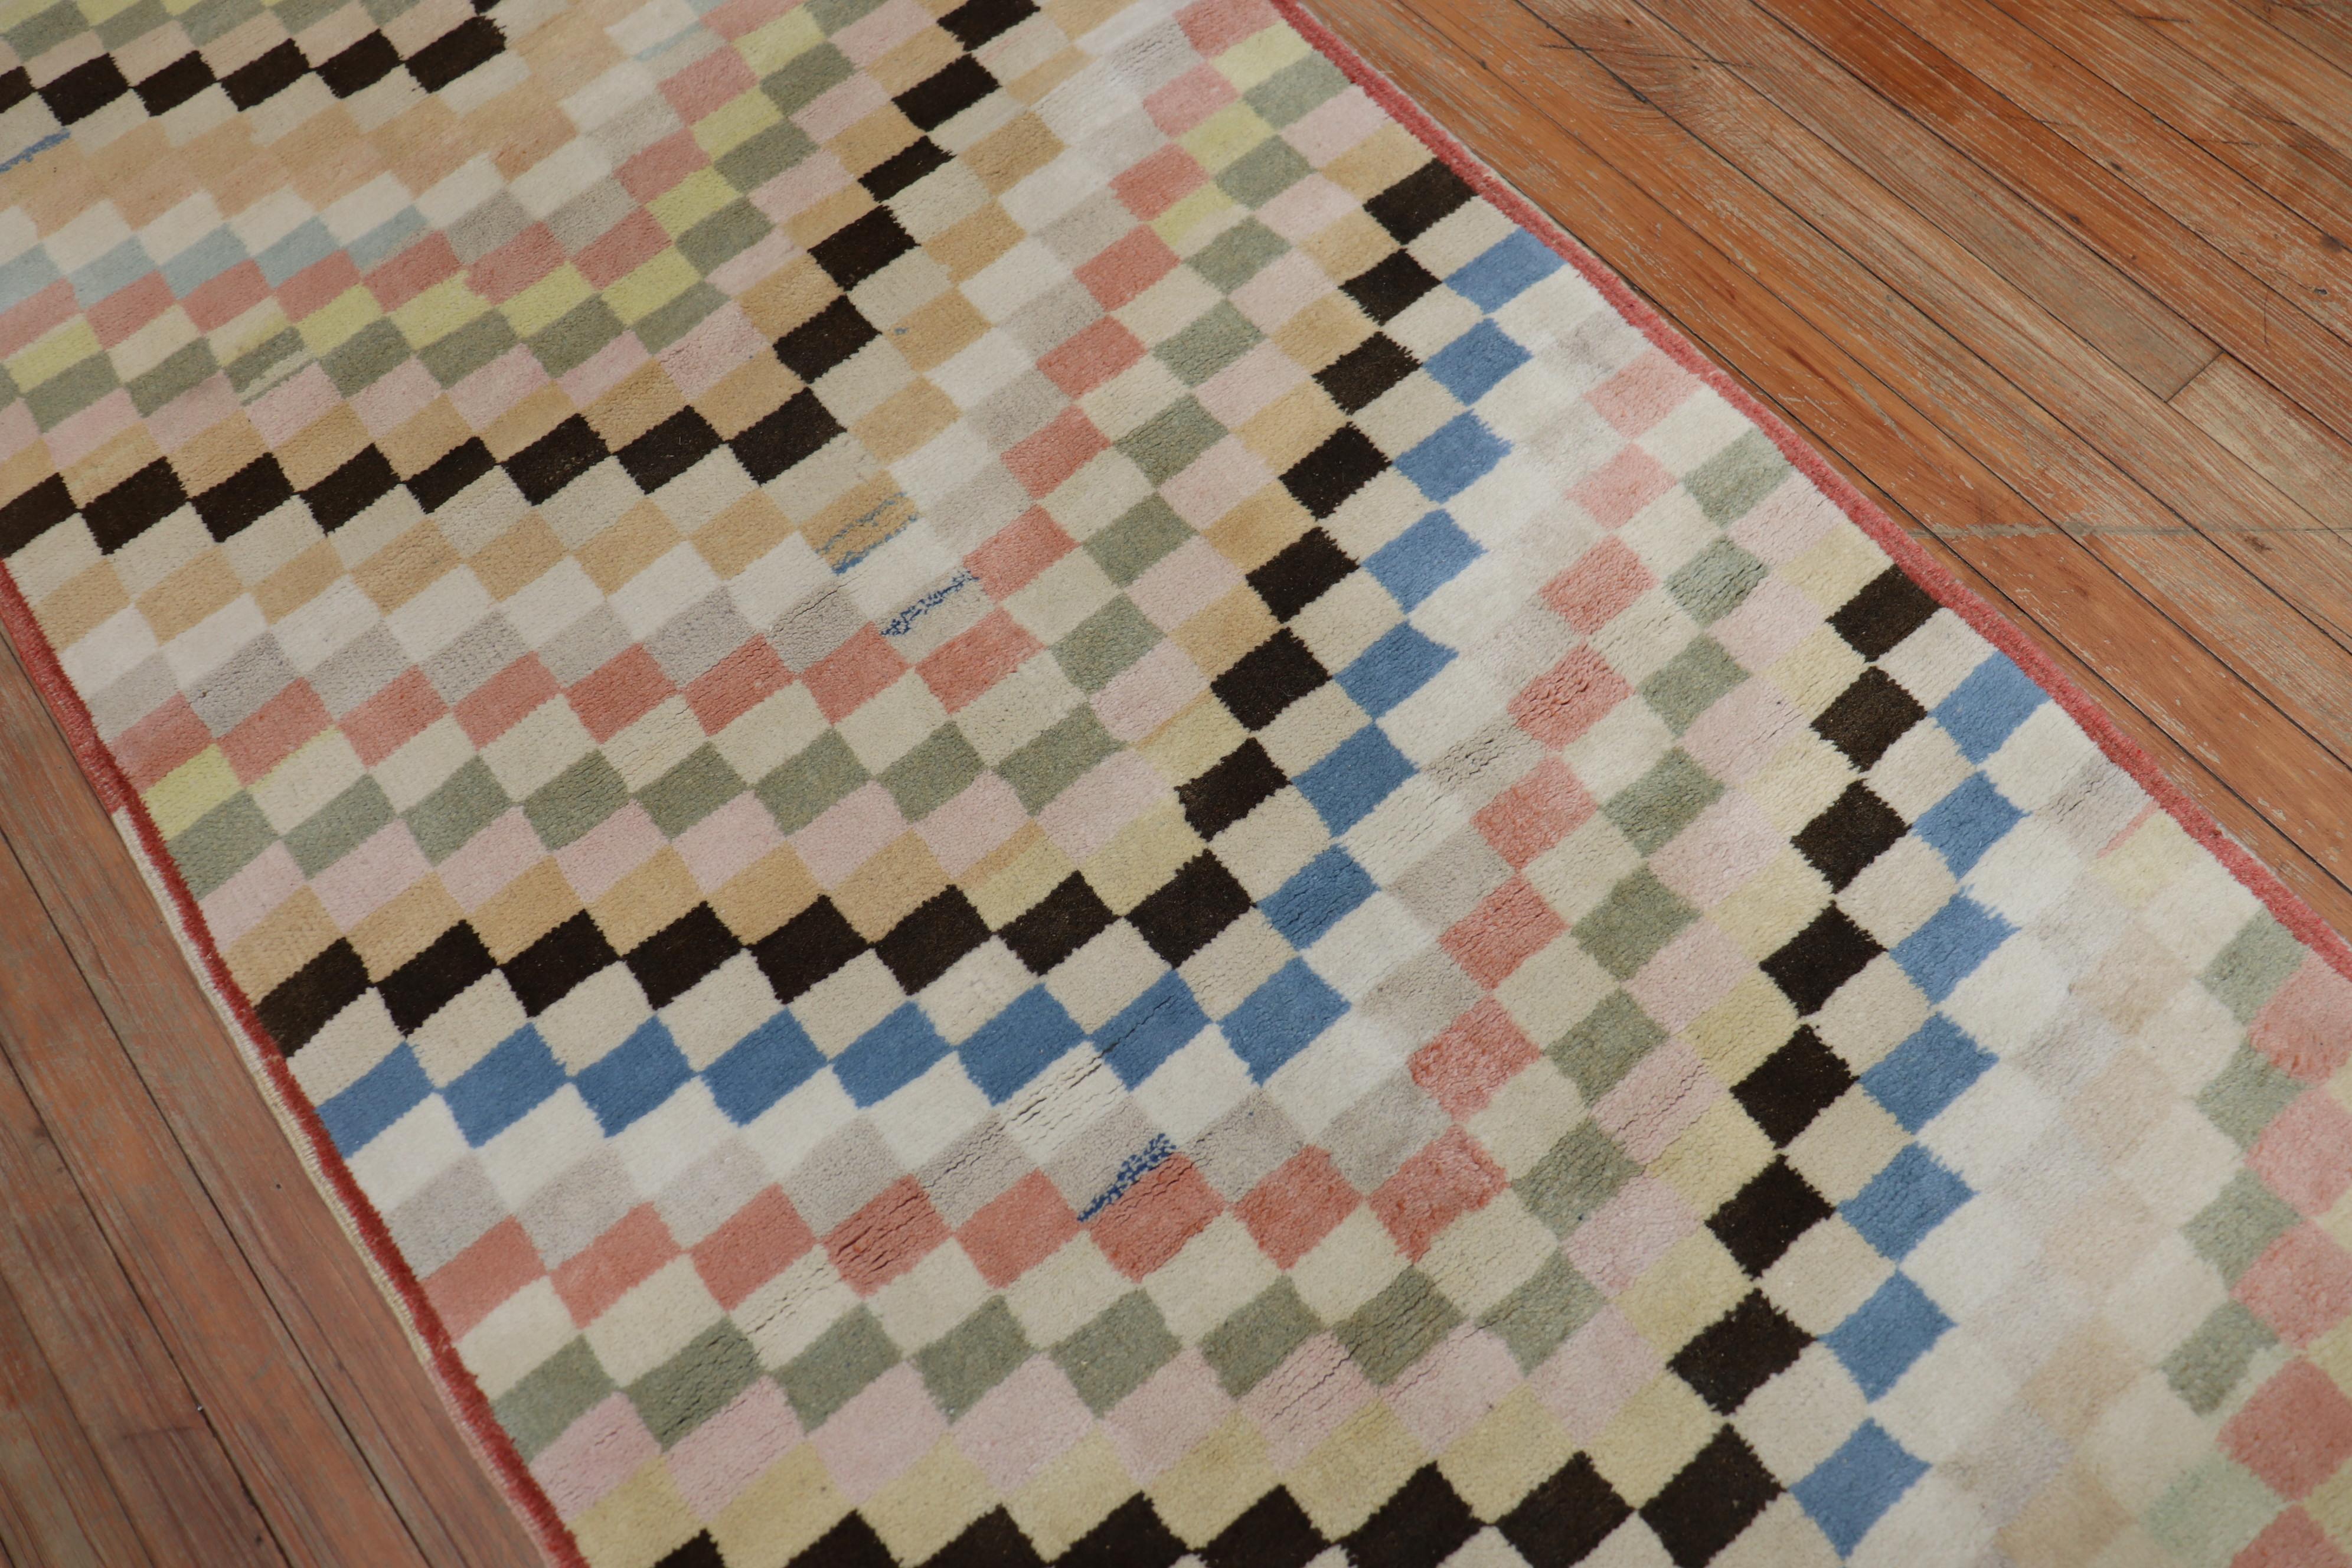 Rare long runner size 3rd quarter of the 20th century Turkish deco rug with a repetitive all-over checkerboard design in an assortment of different colors. Originally custom made for a hallway in a private estate in ankara turkey

Measures: 3' x